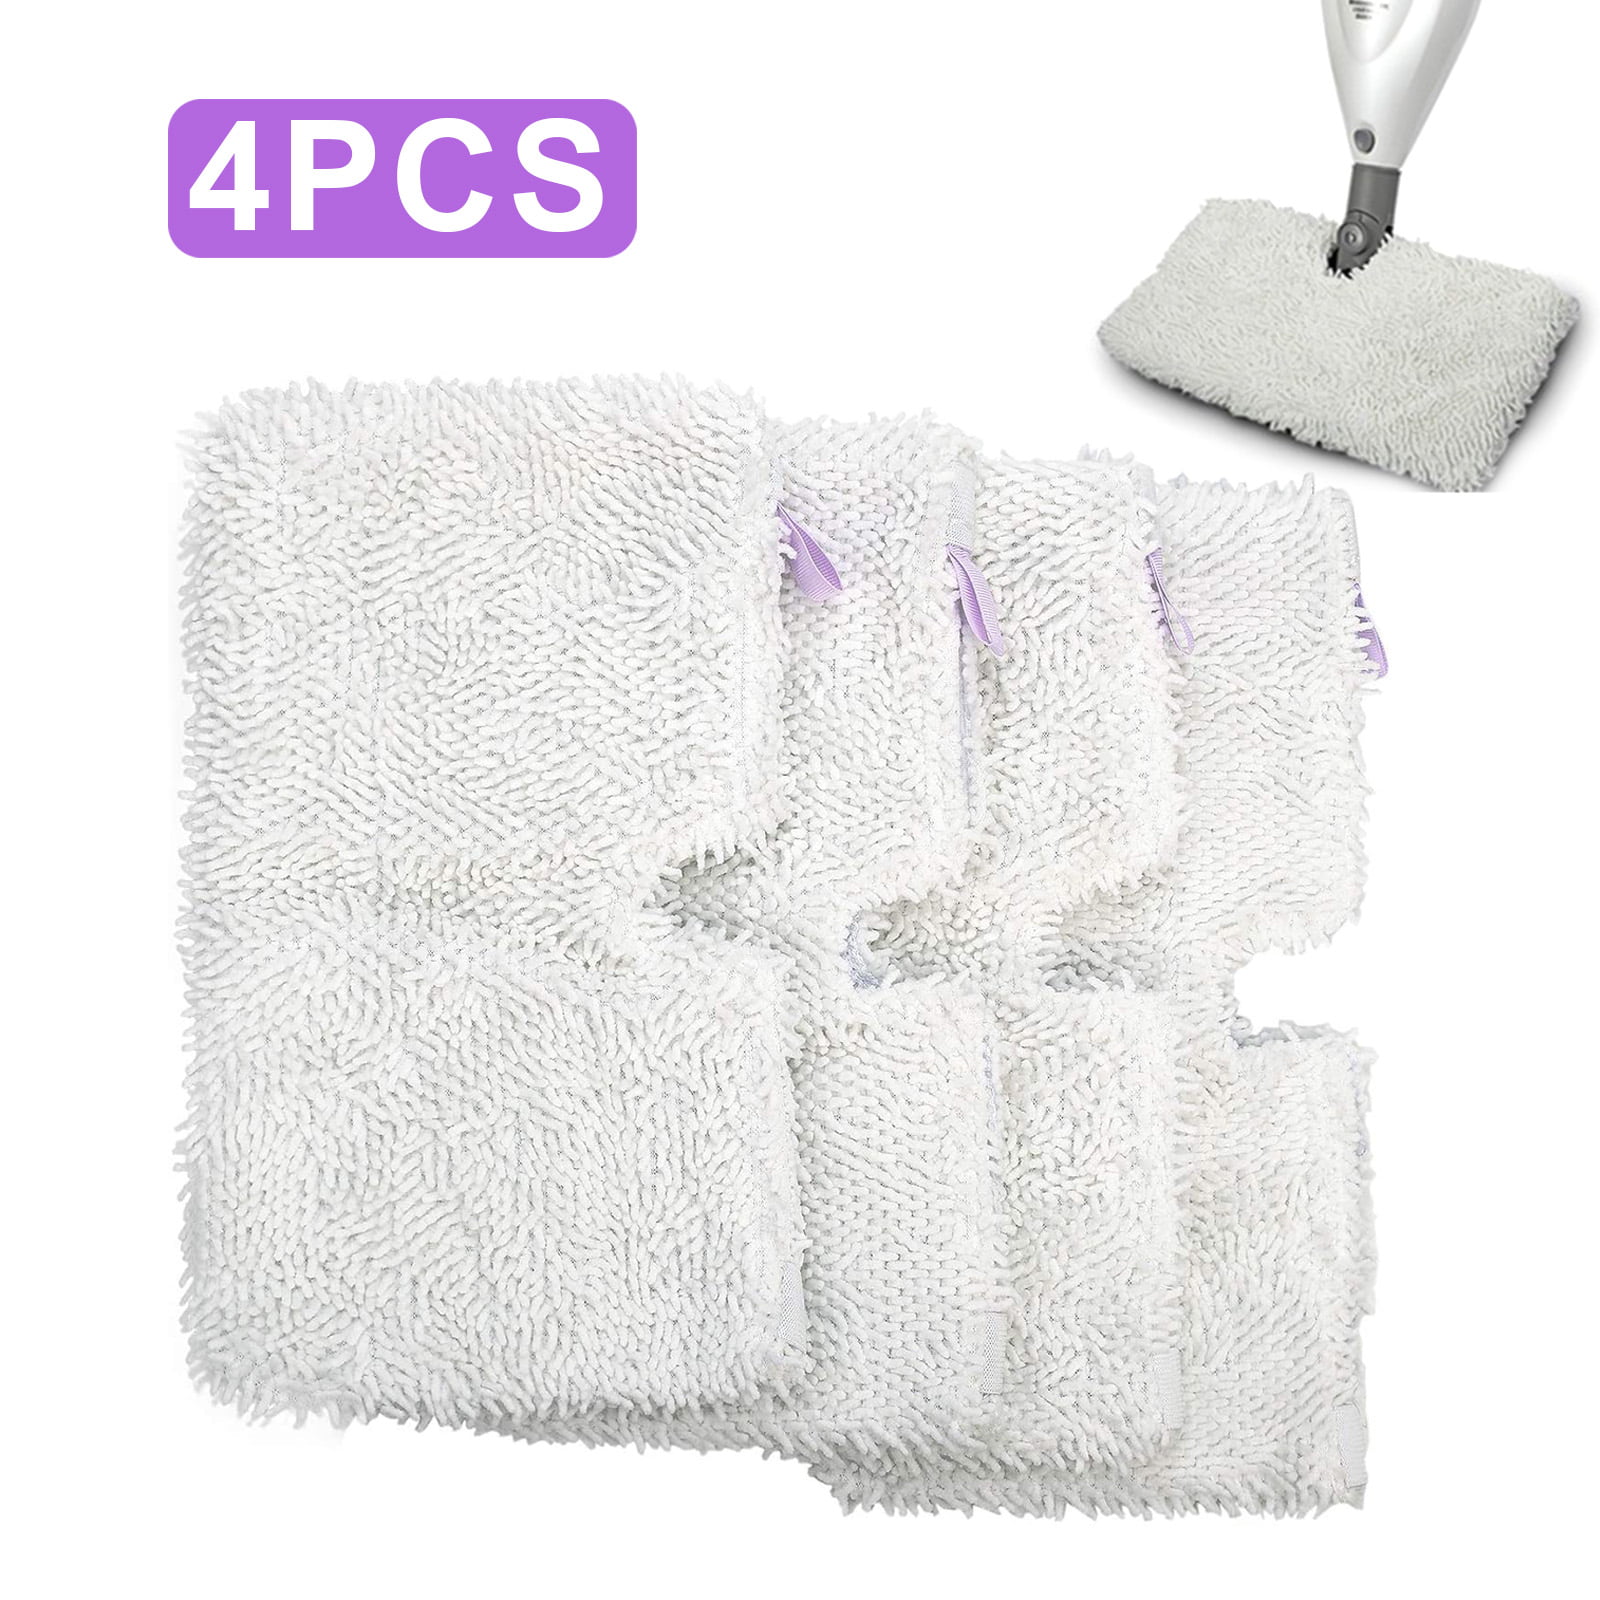 2 x Microfibre Washable Universal Steam Mop Cloth Cleaning Pads 